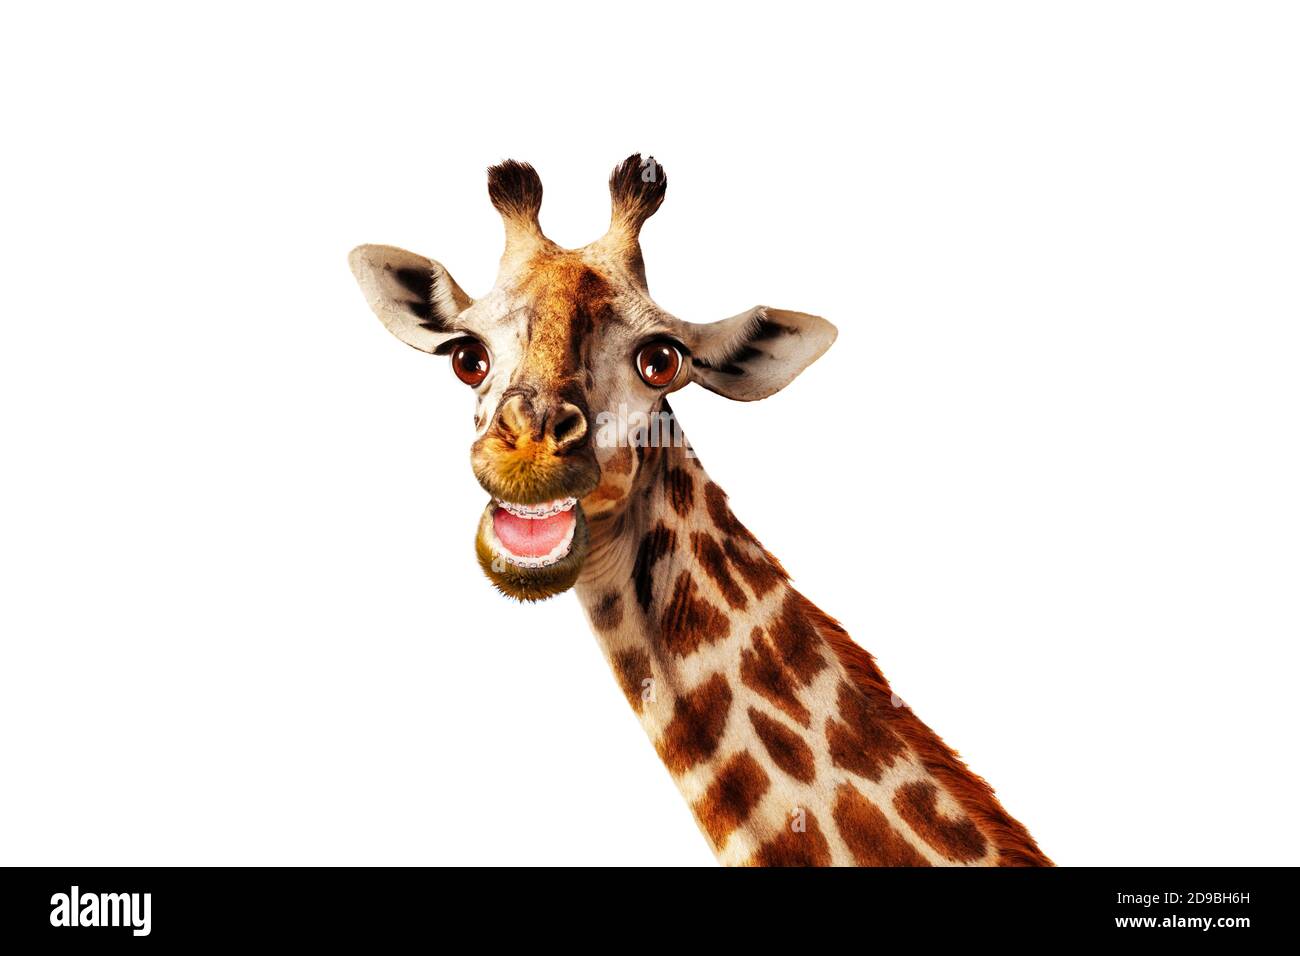 Funny photo of giraffe with open mouth and scarf hat isolated on white Stock Photo